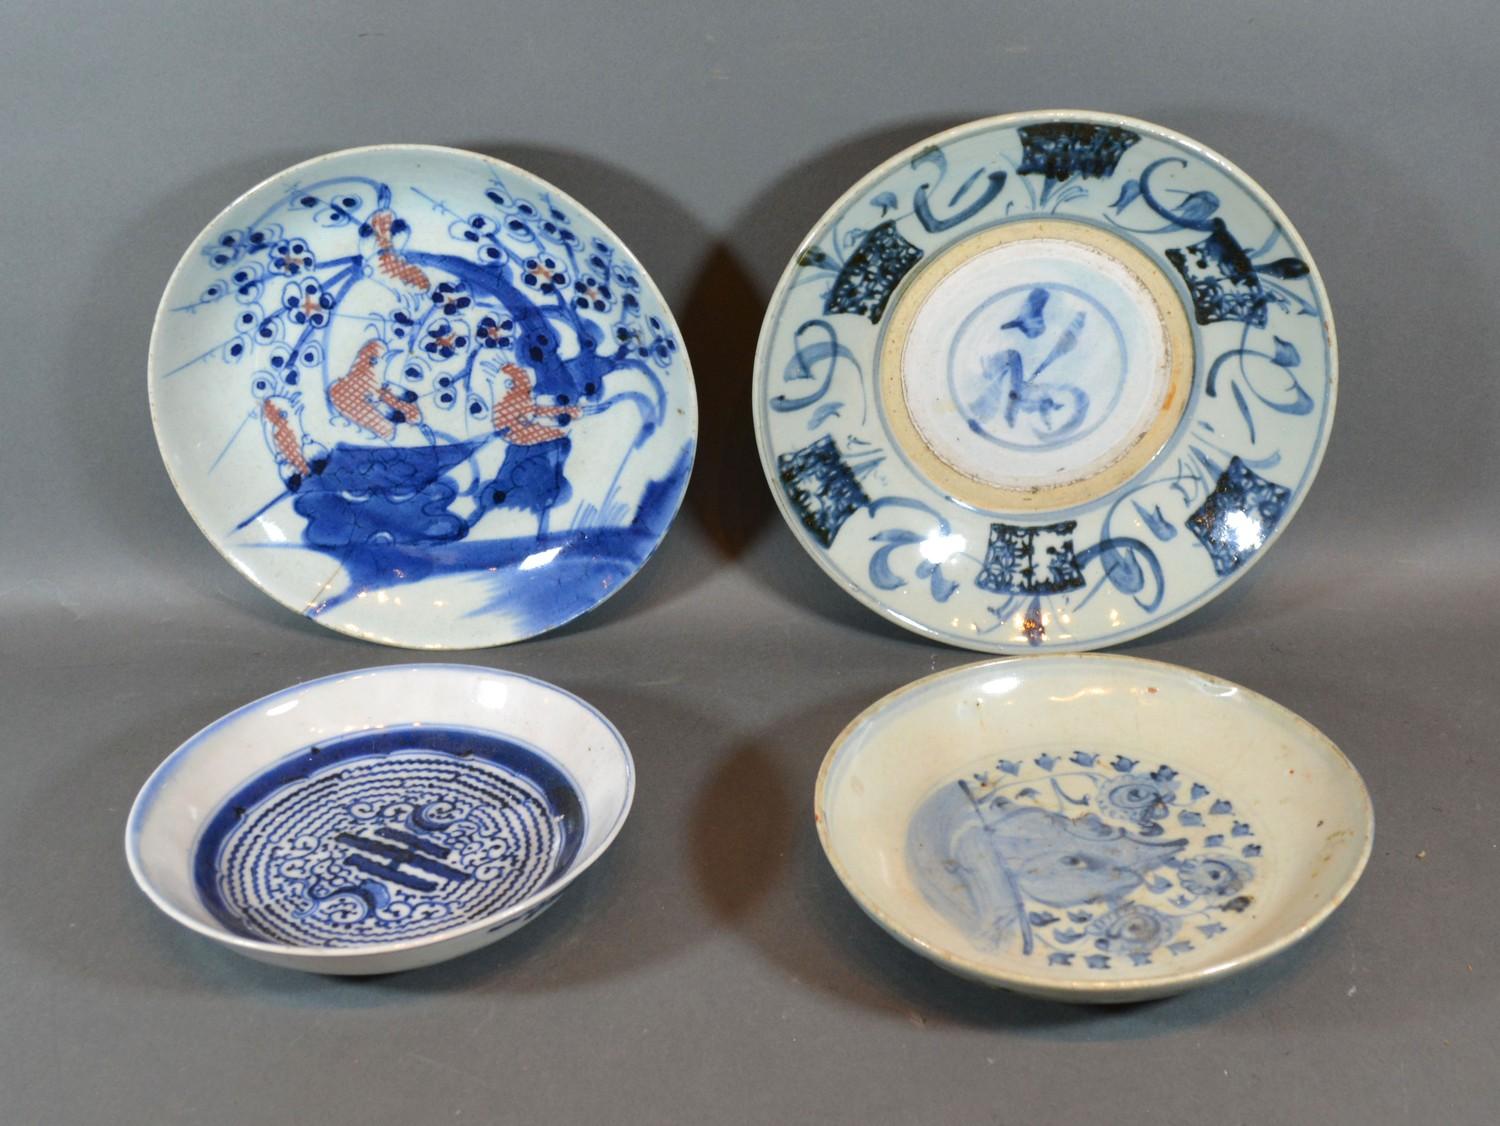 A Chinese Underglaze Blue Decorated Dish 24cm diameter together with three other similar Chinese